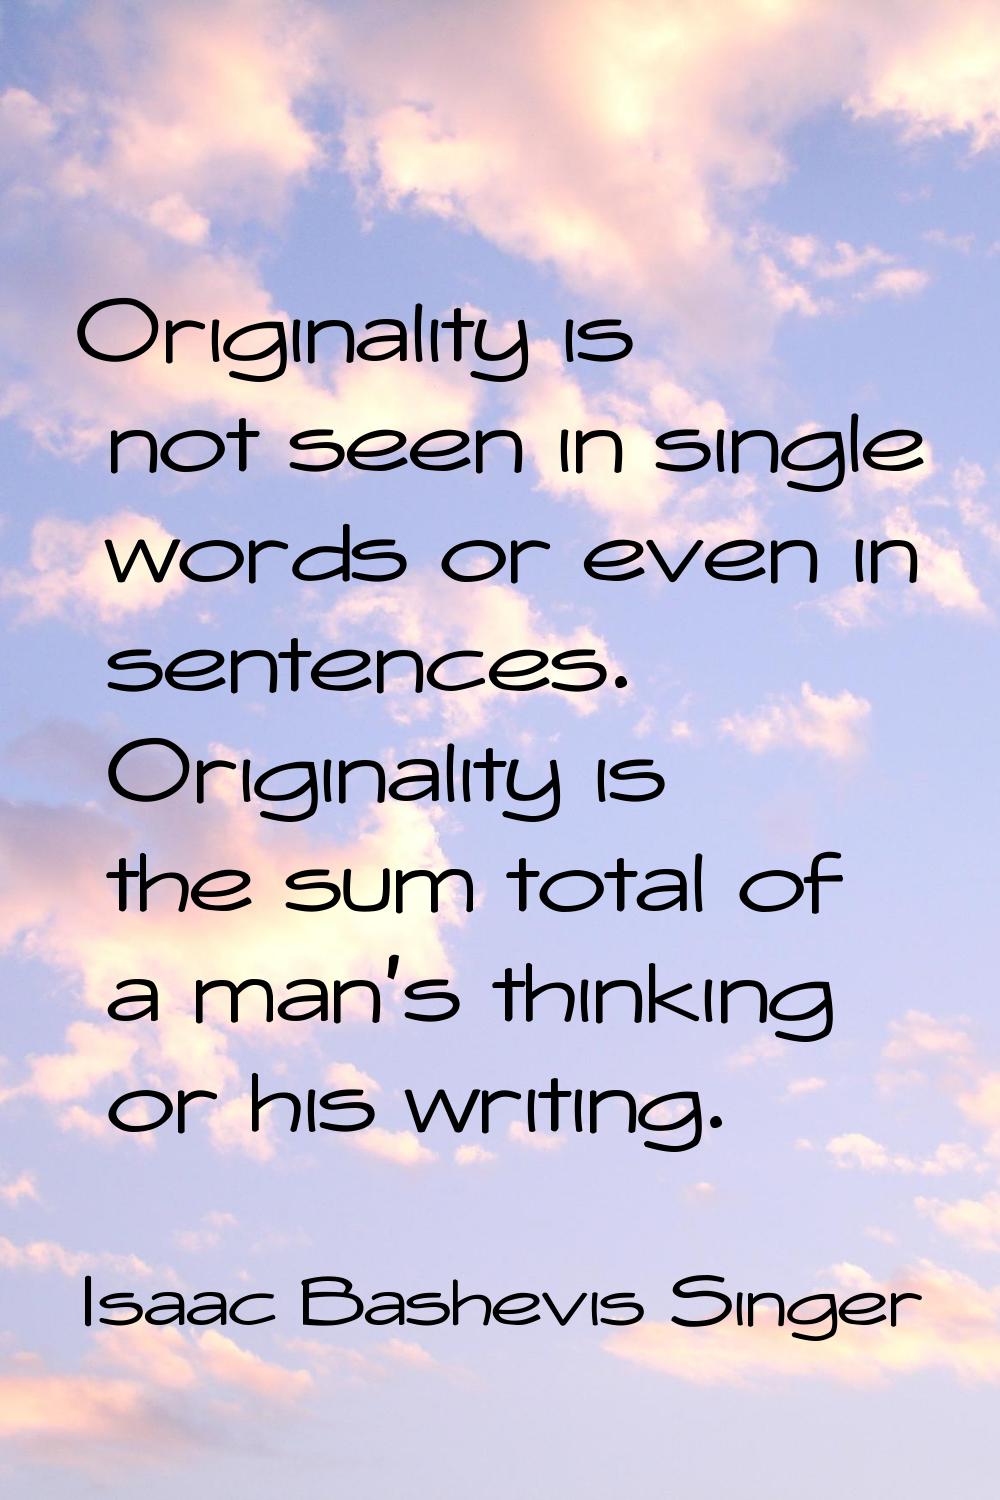 Originality is not seen in single words or even in sentences. Originality is the sum total of a man